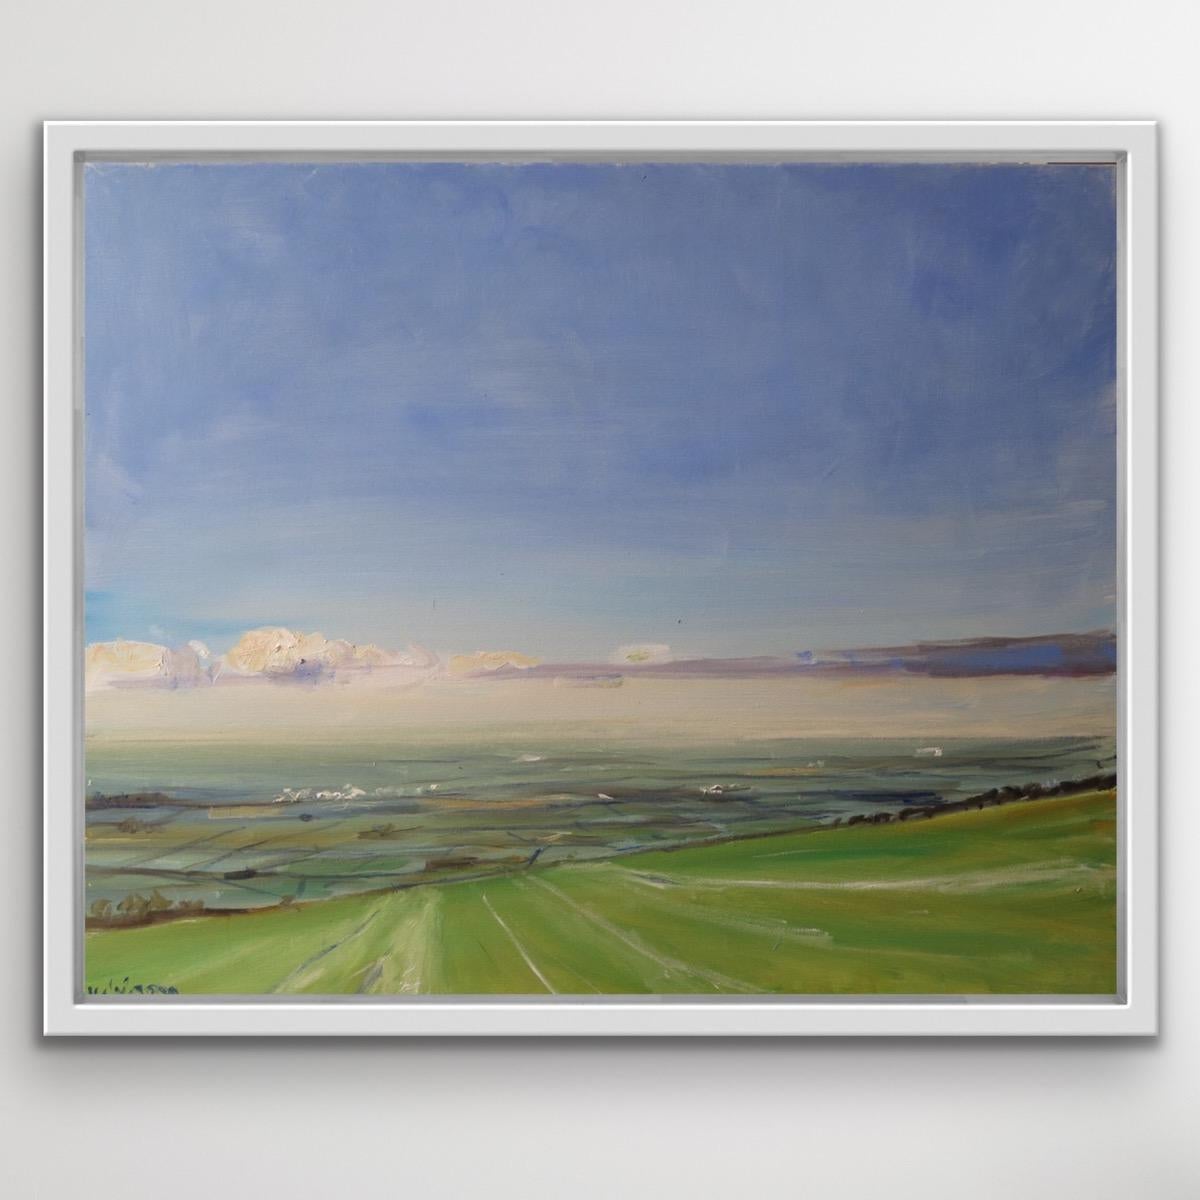 View from the Wolds, is an original painting by Malcom Ludvigsen. It’s a proper plein-air oil painting, painted on the spot from Garrowby Hill looking over the Vale of York. It is unframed but painted round the edge and D-rings and chord are